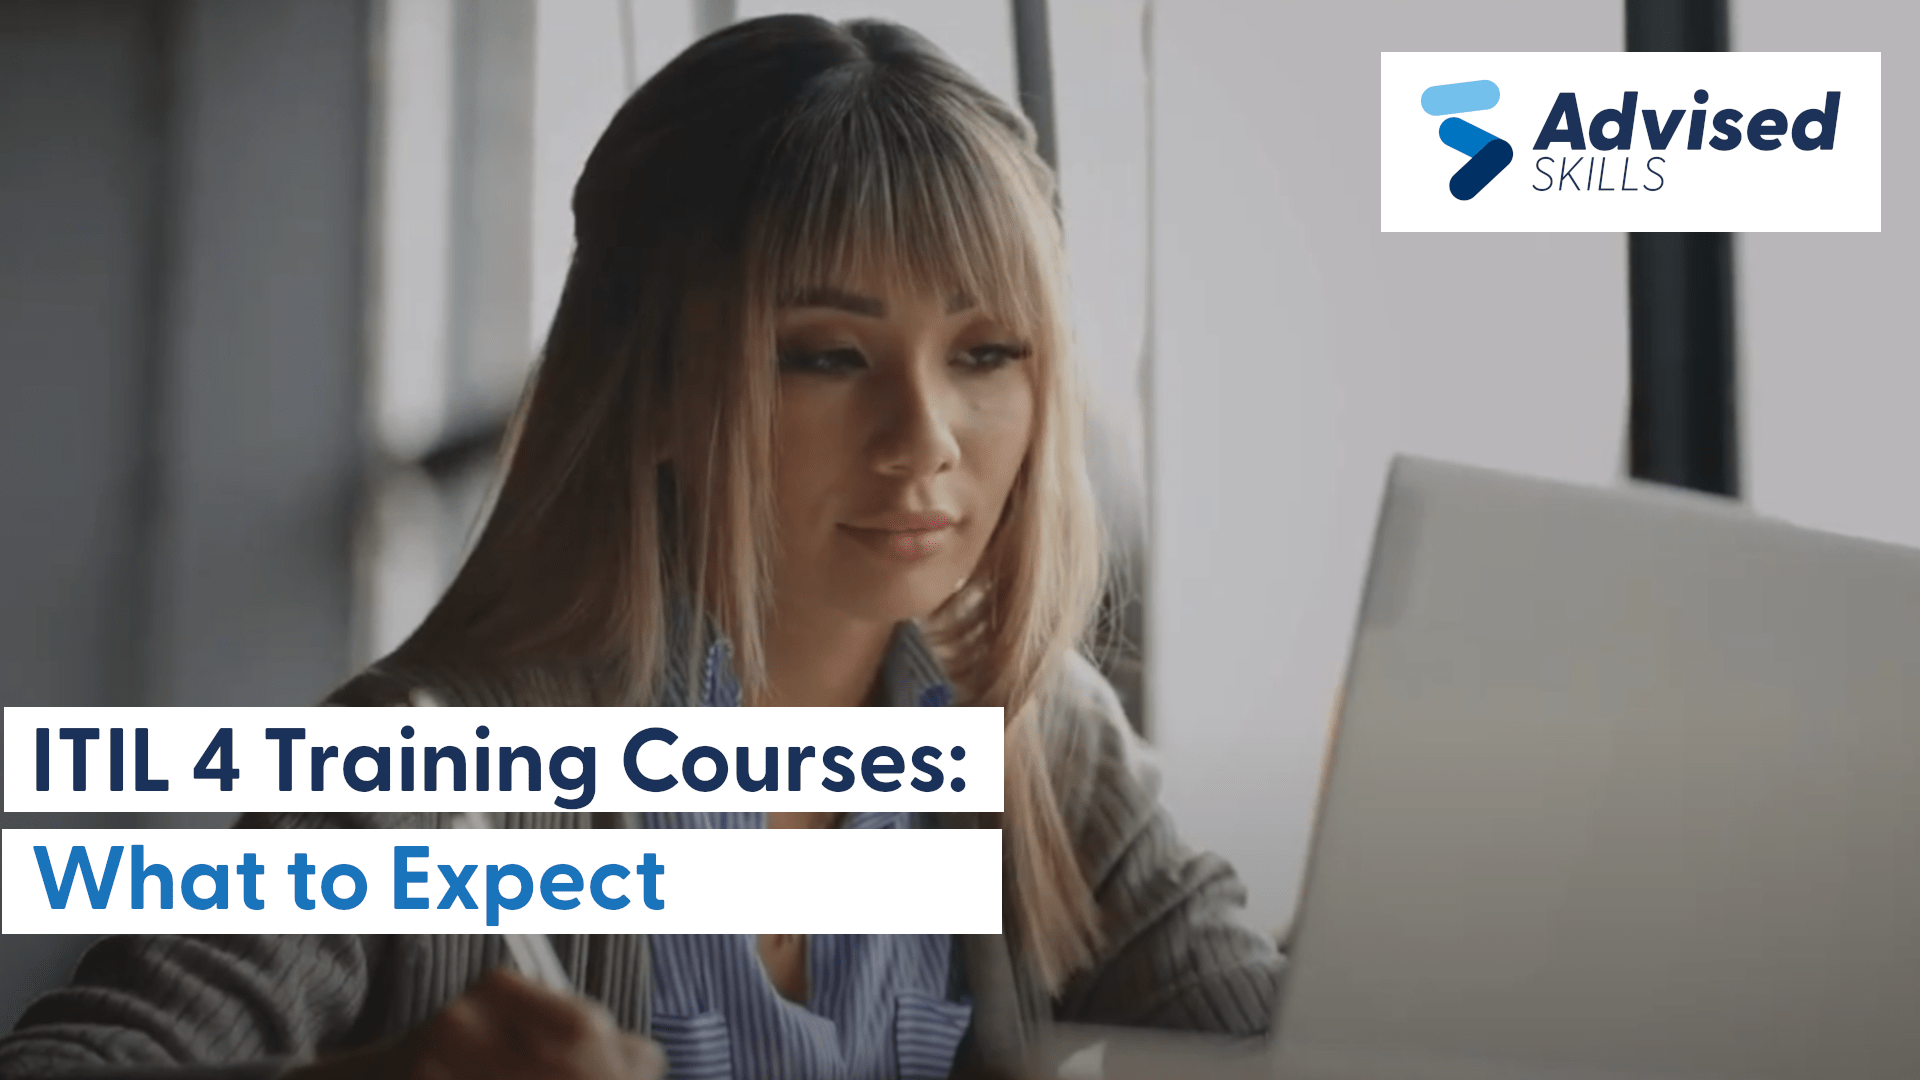 ITIL 4 can help you learn how to better integrate various IT services or products. Here's what you can expect to learn from effective ITIL 4 training.